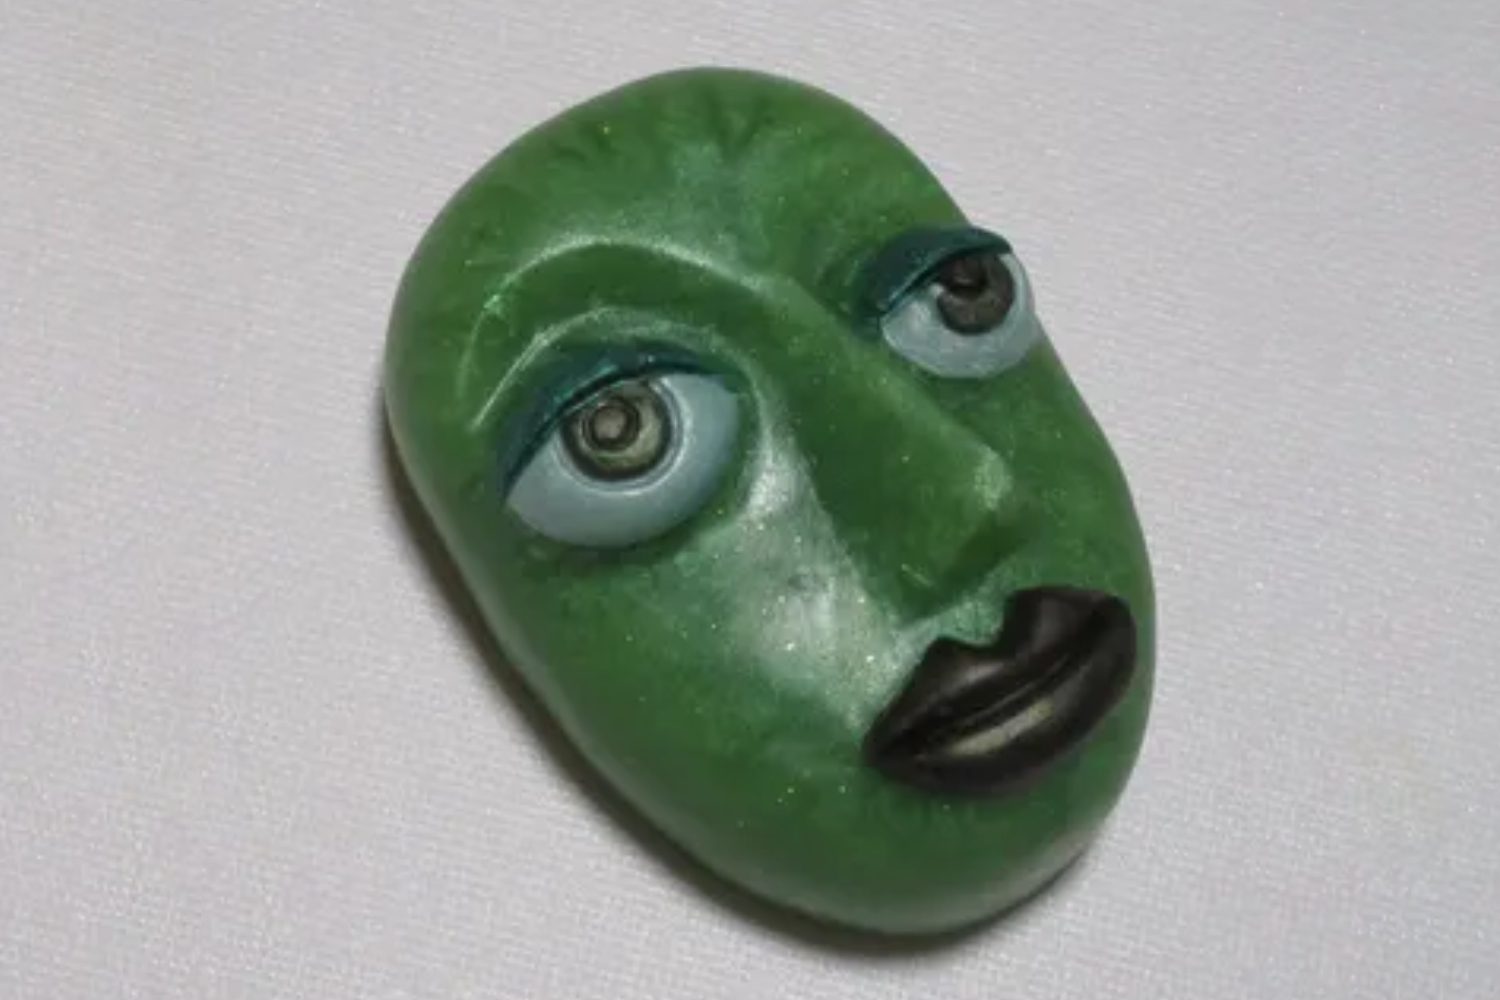 A green face with blue eyes and black lips.